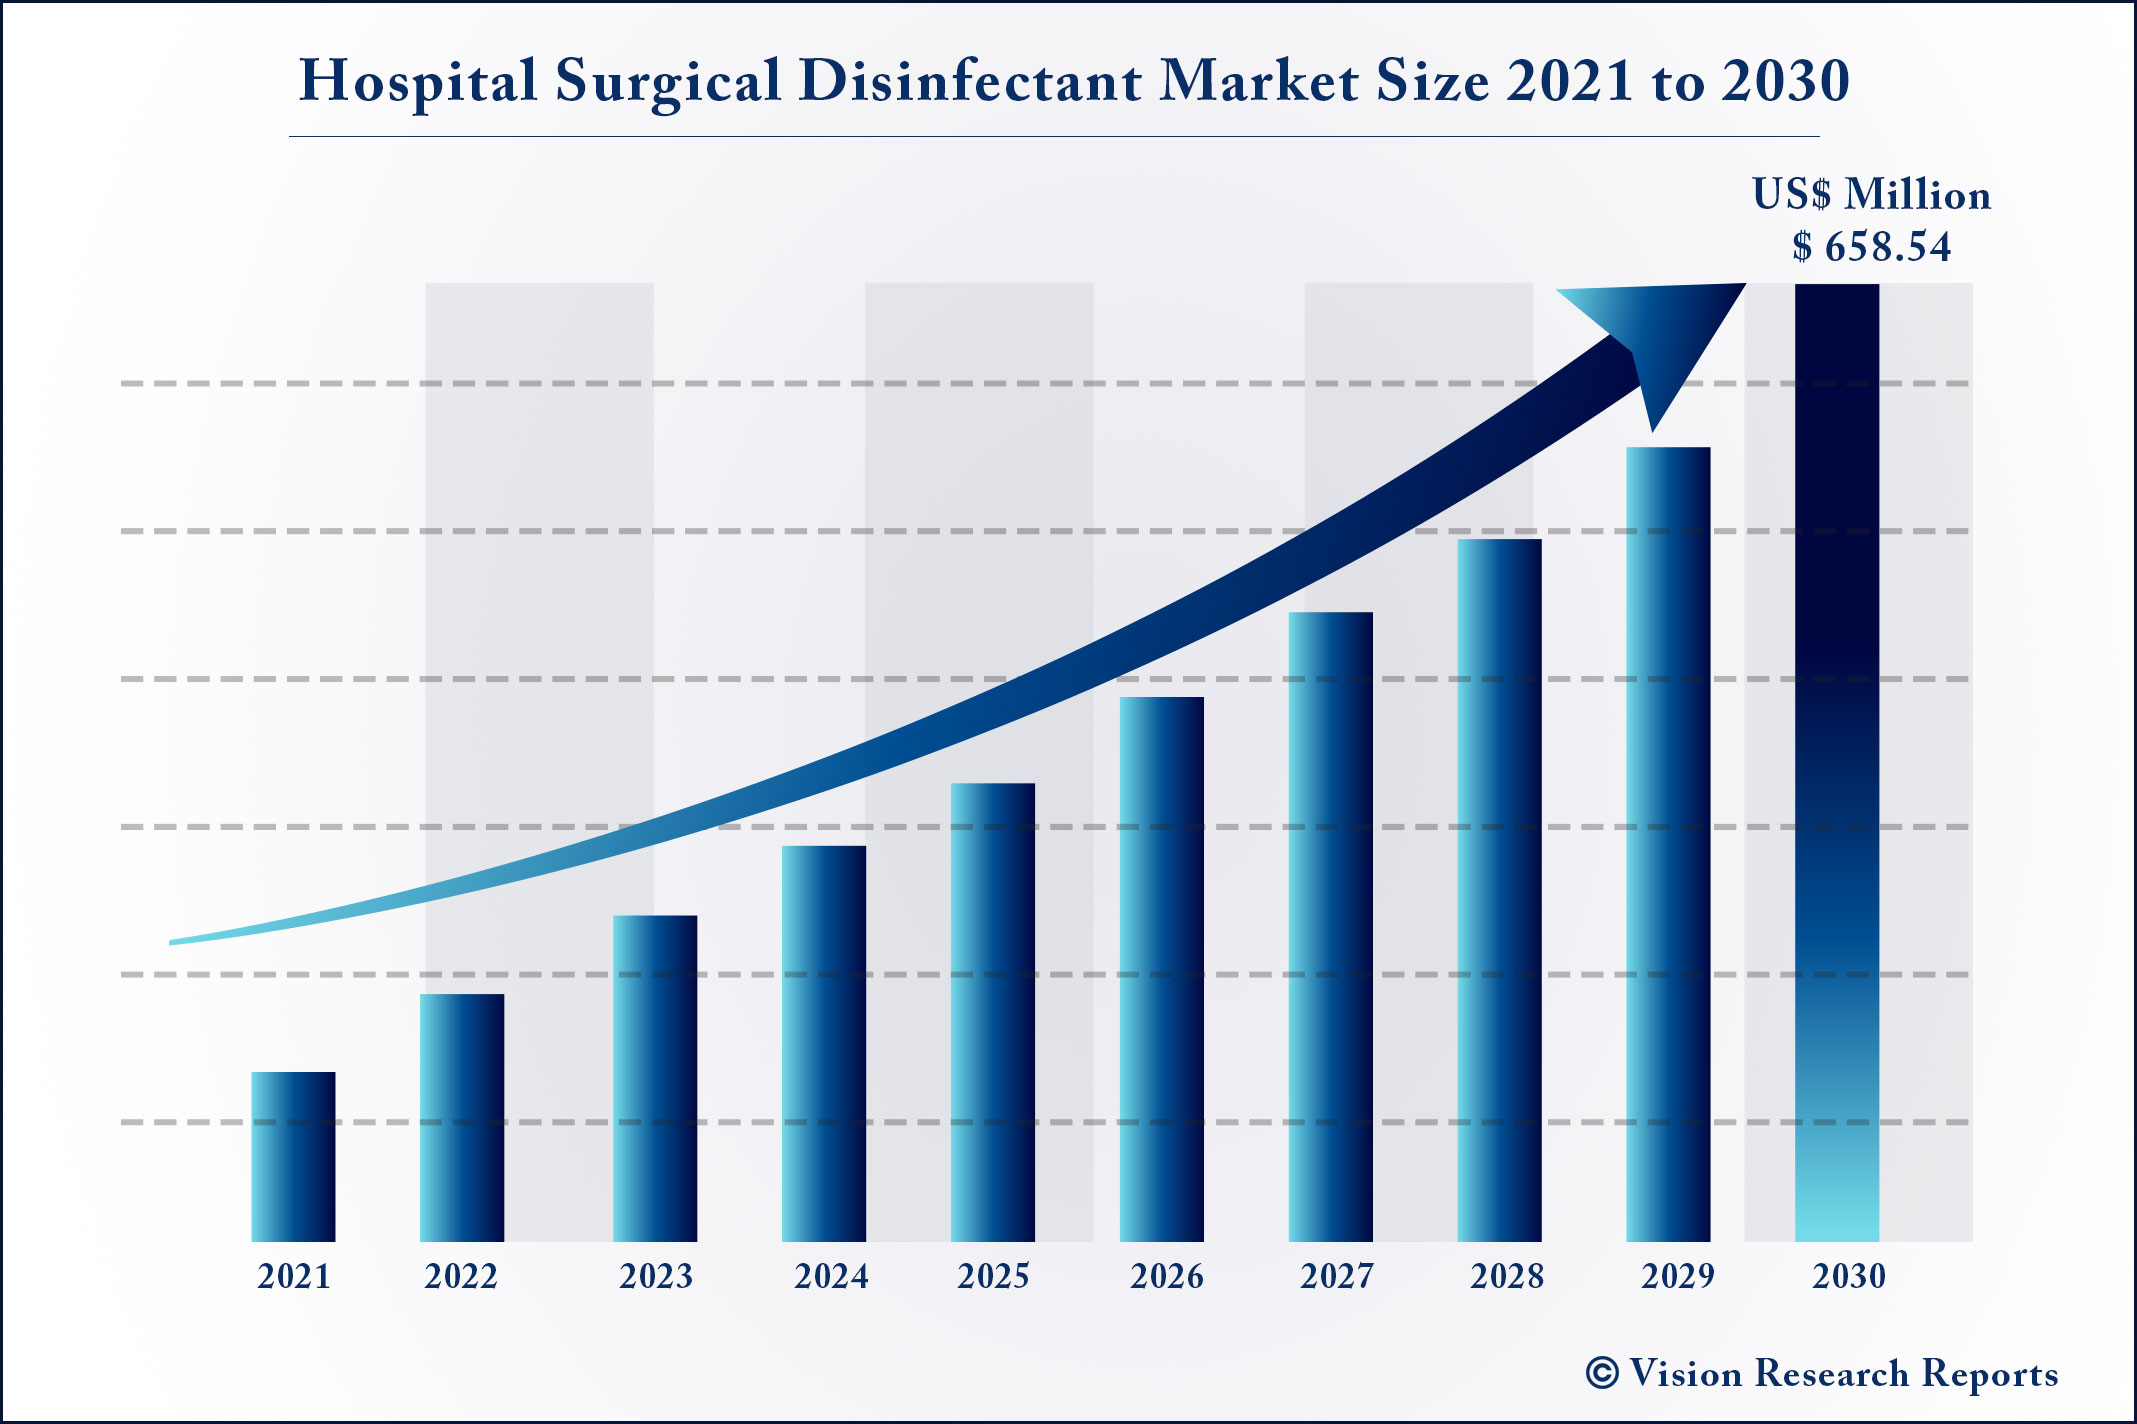 Hospital Surgical Disinfectant Market Size 2021 to 2030